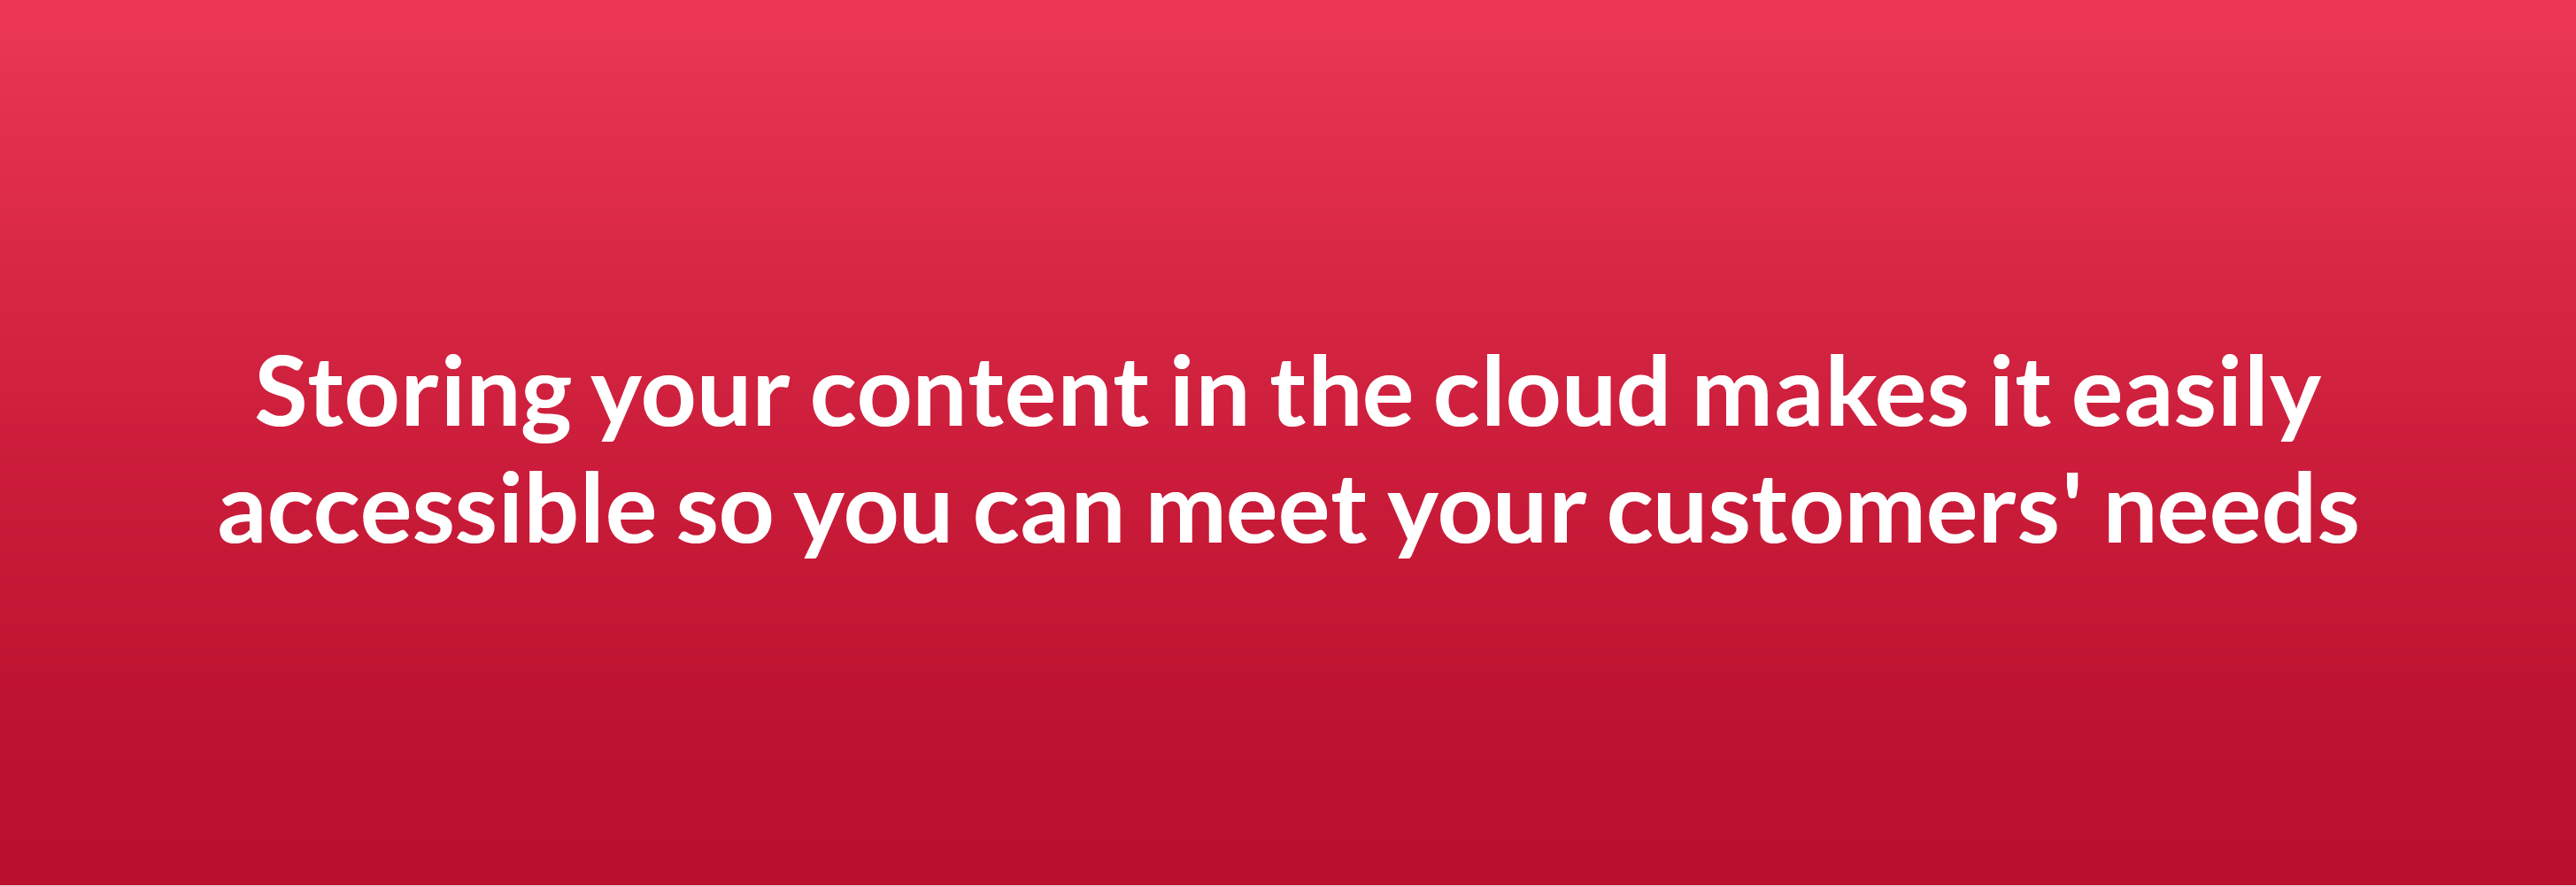 Storing your content in the cloud makes it easily accessible so you can meet your customers' needs